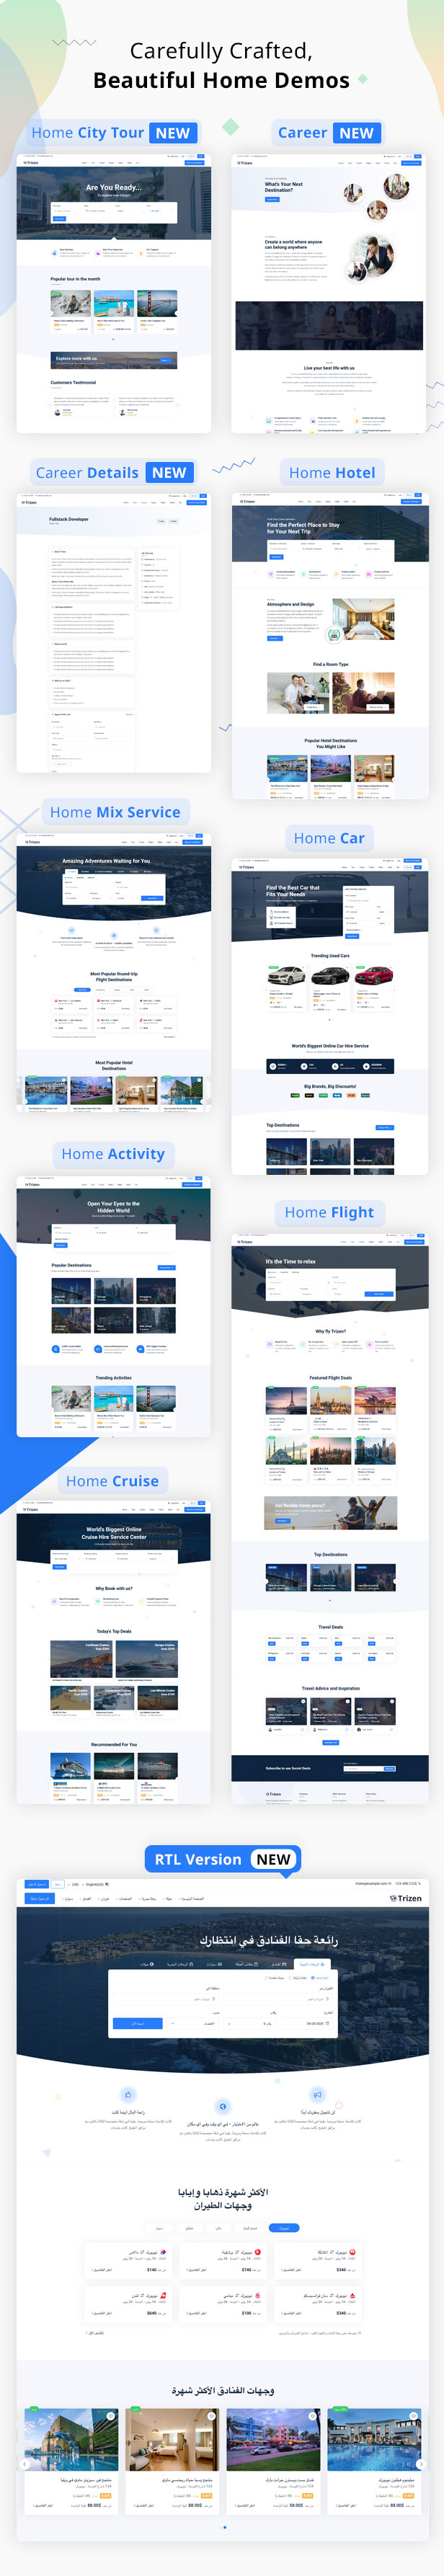 Trizen - Travel Hotel Booking HTML5 Template with Dashboard - 3